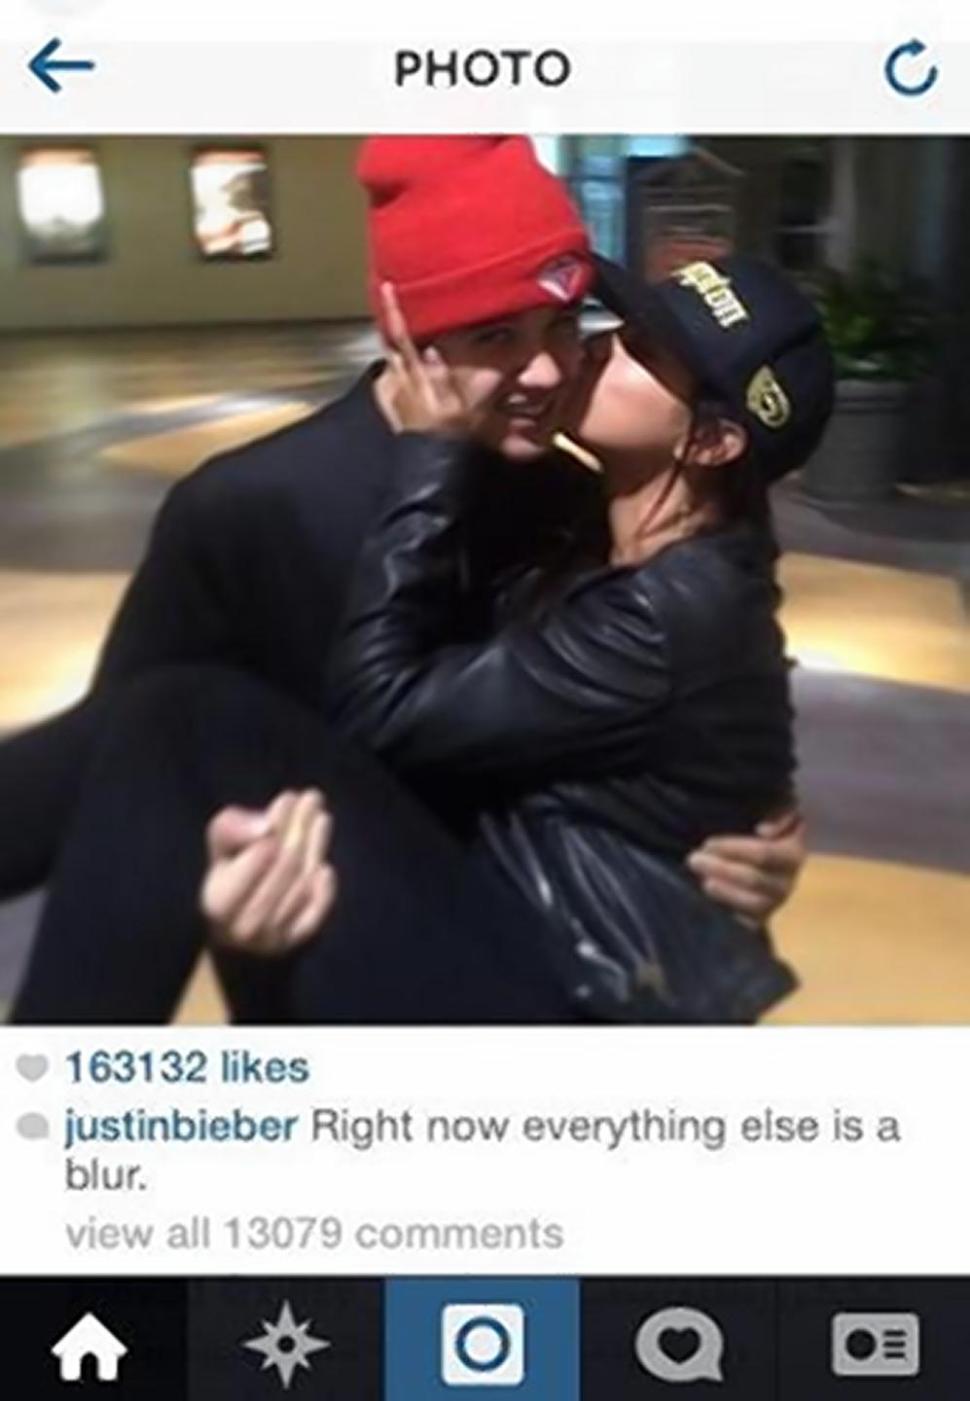 Justin Bieber and Selena Gomez are back together, at least in an Instagram post.